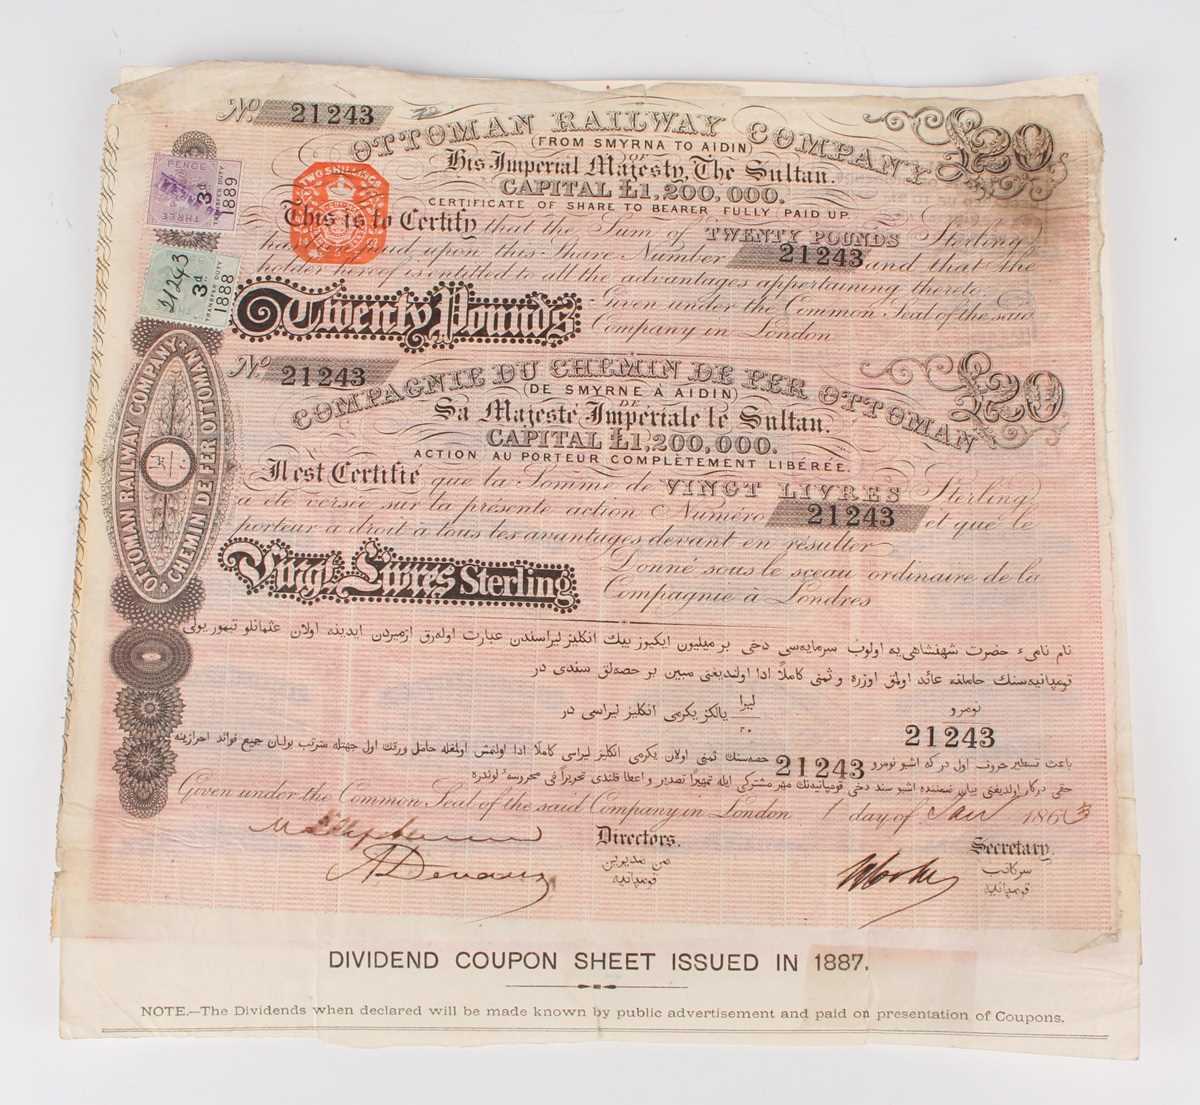 SHARE CERTIFICATES. An Ottoman Railway Company from Smyrna to Aidin £20 share certificate, No.